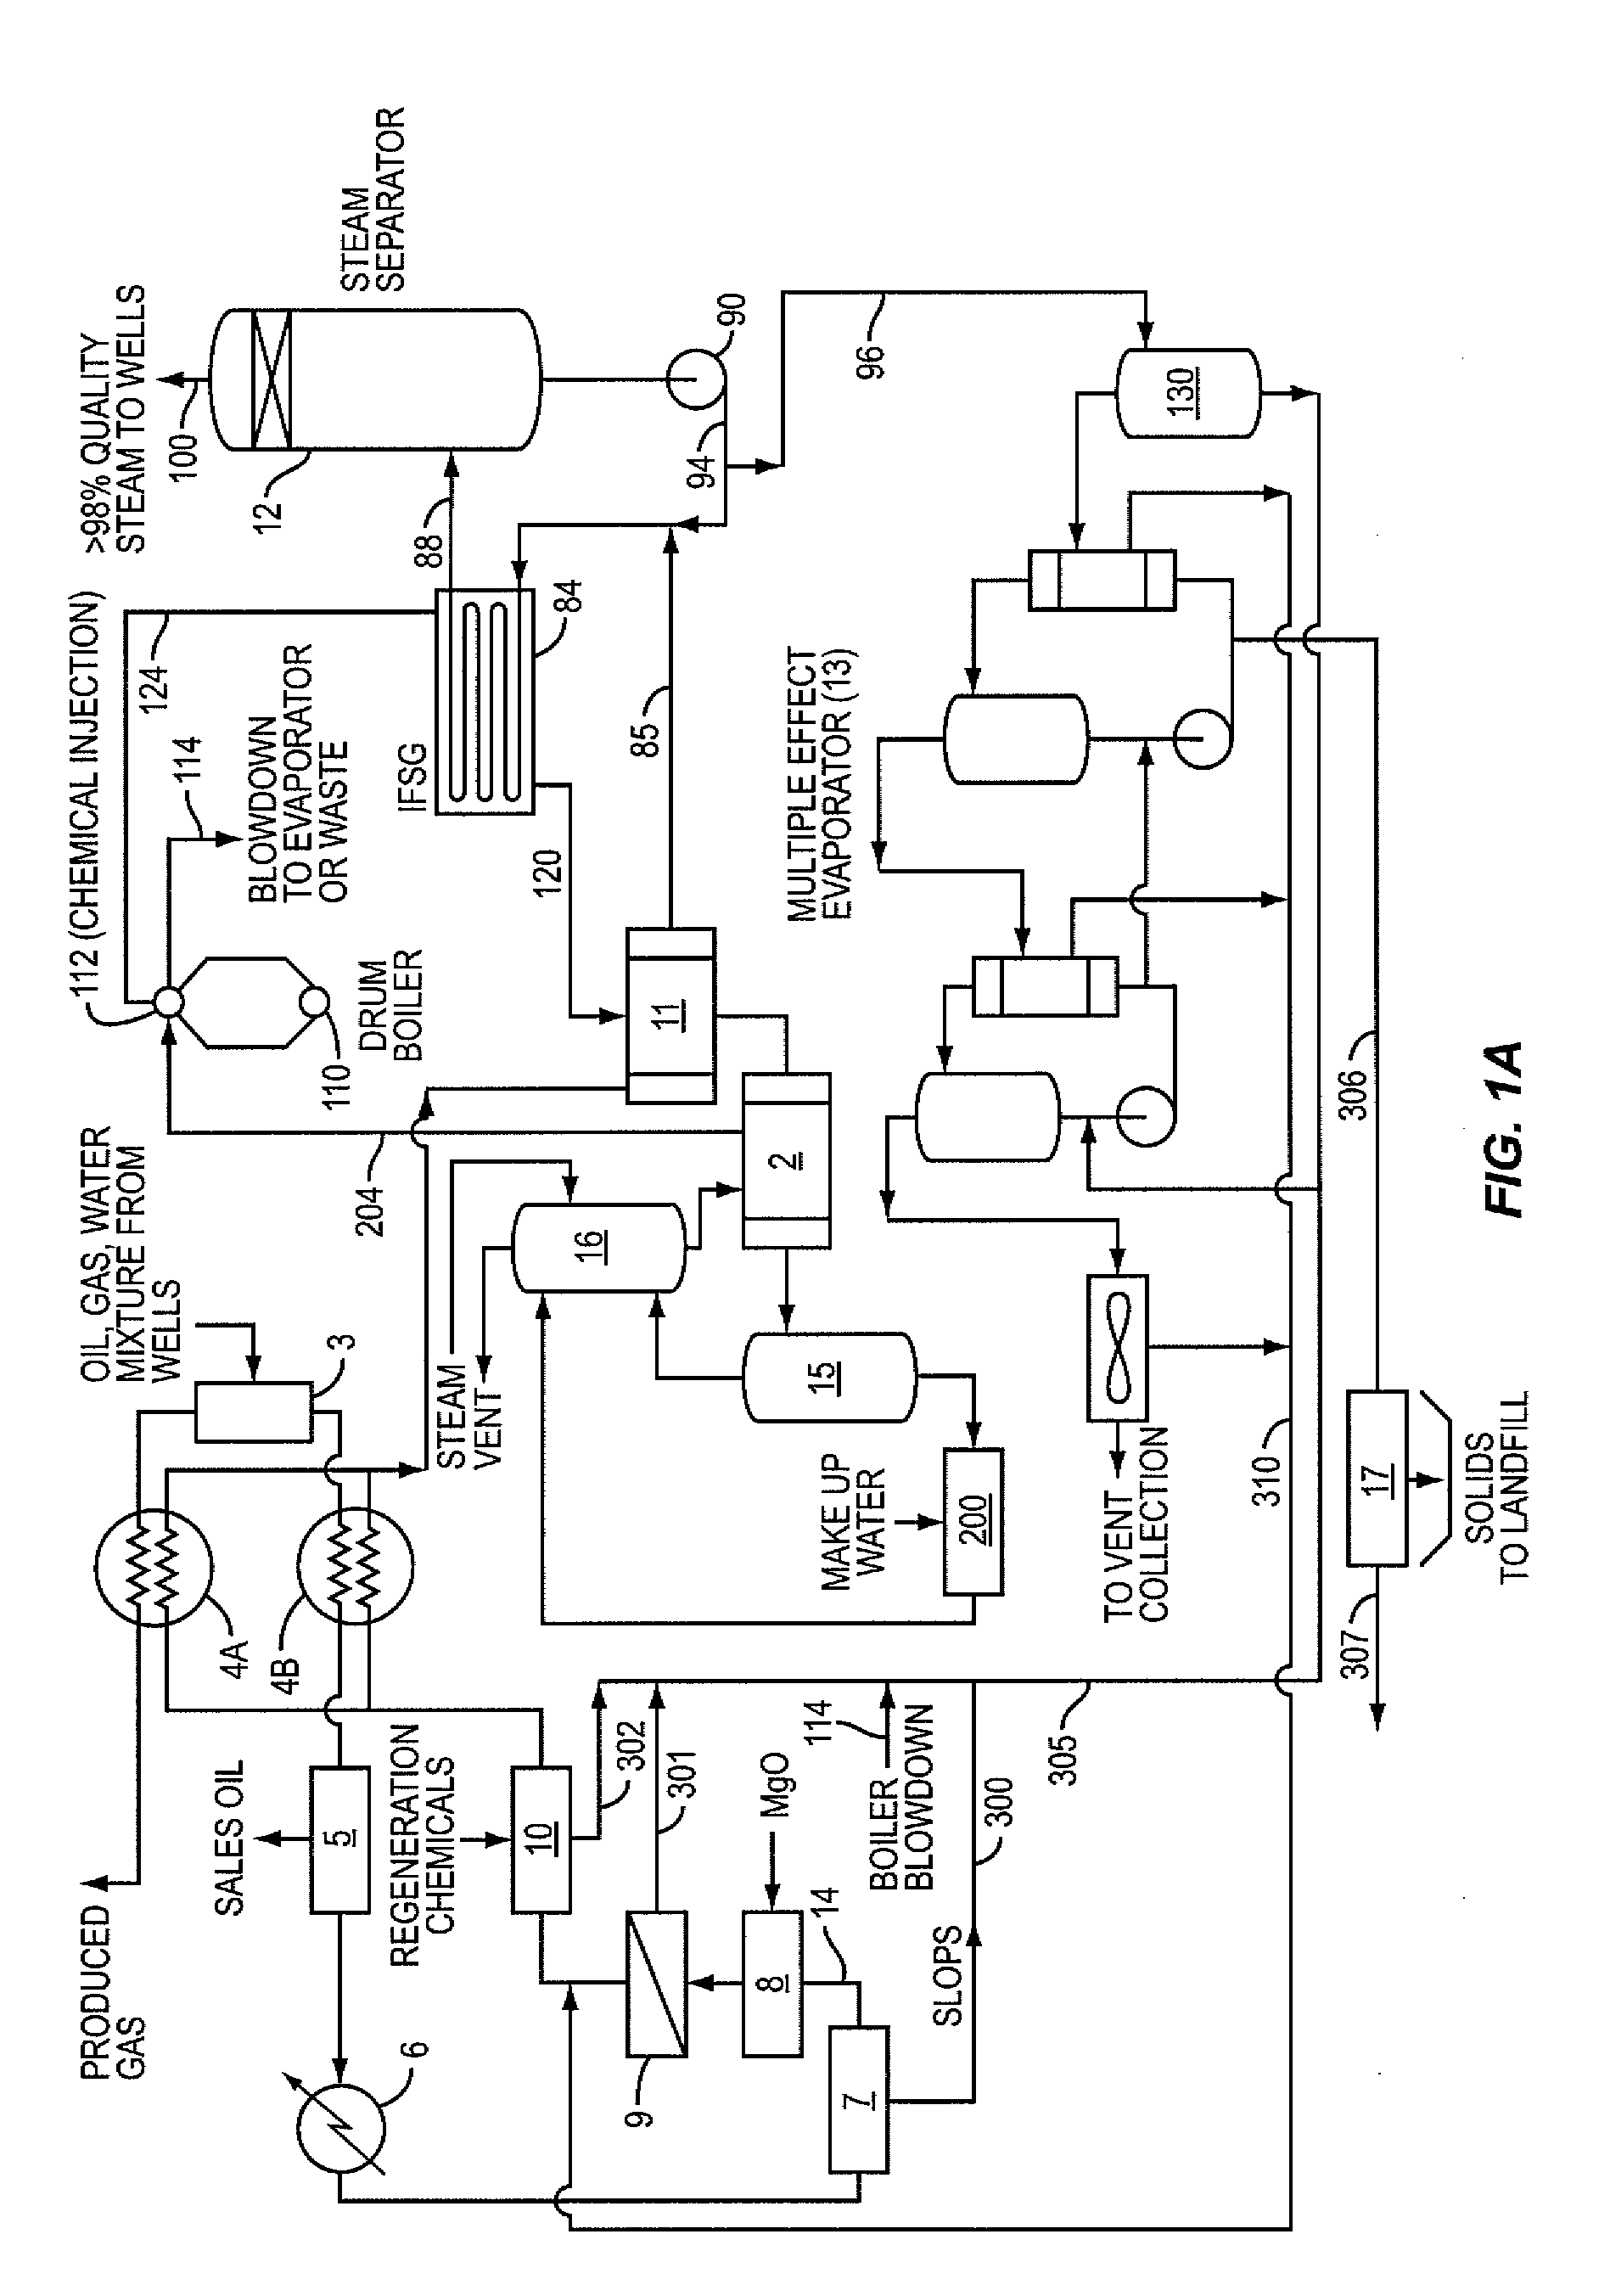 Method and System for Recovering Oil and Generating Steam from Produced Water